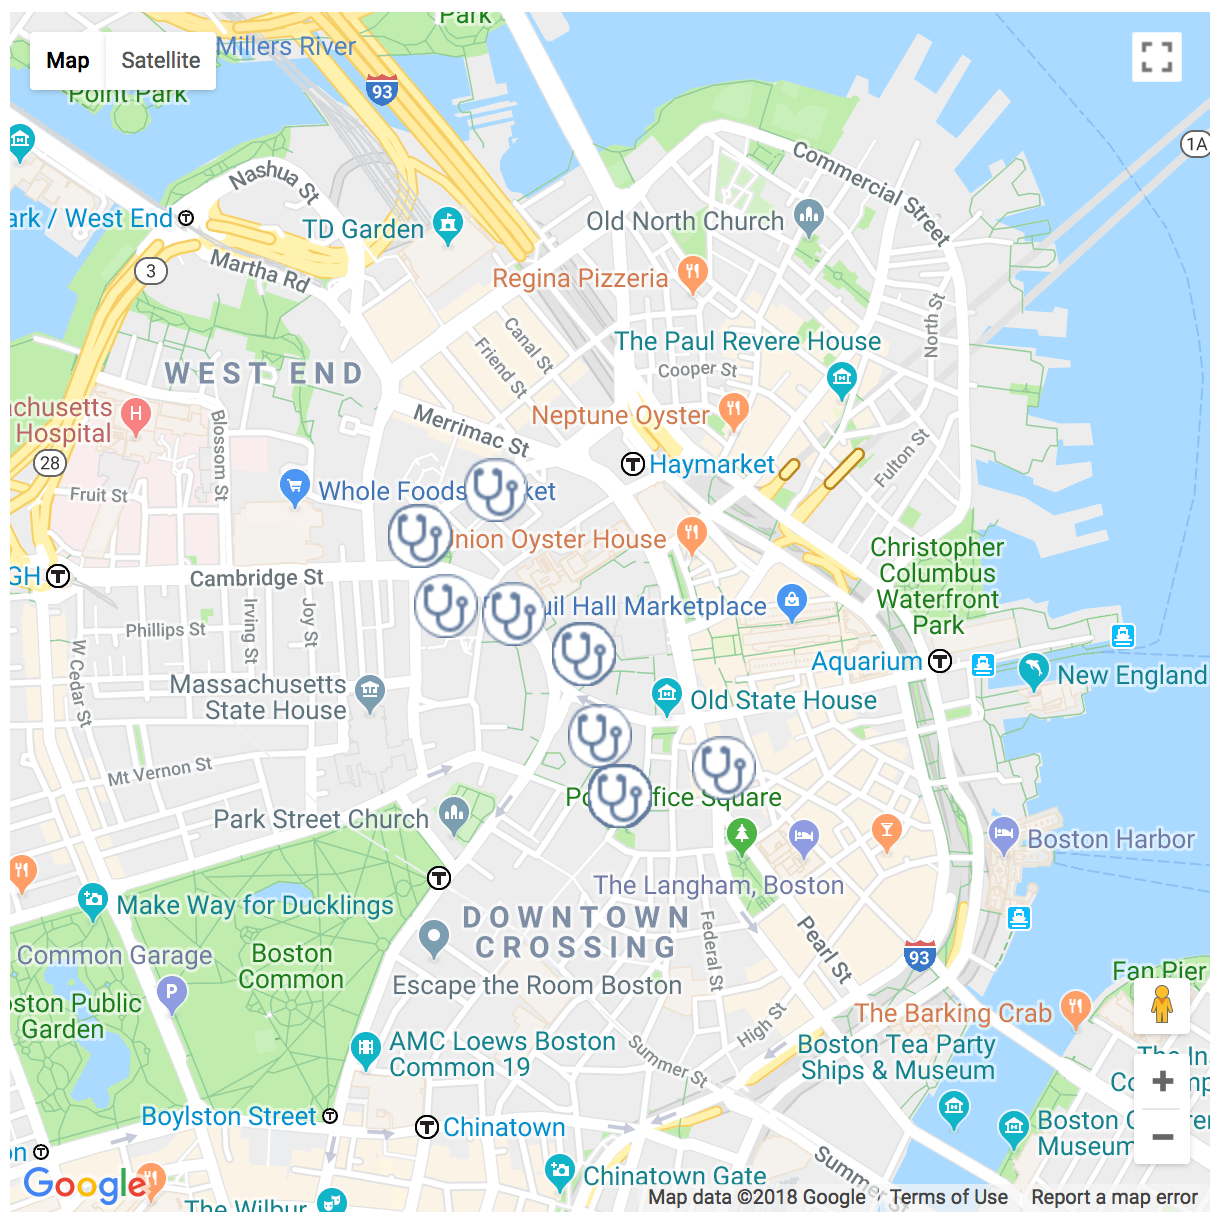 Netrunner Meetups and Events - Google My Maps